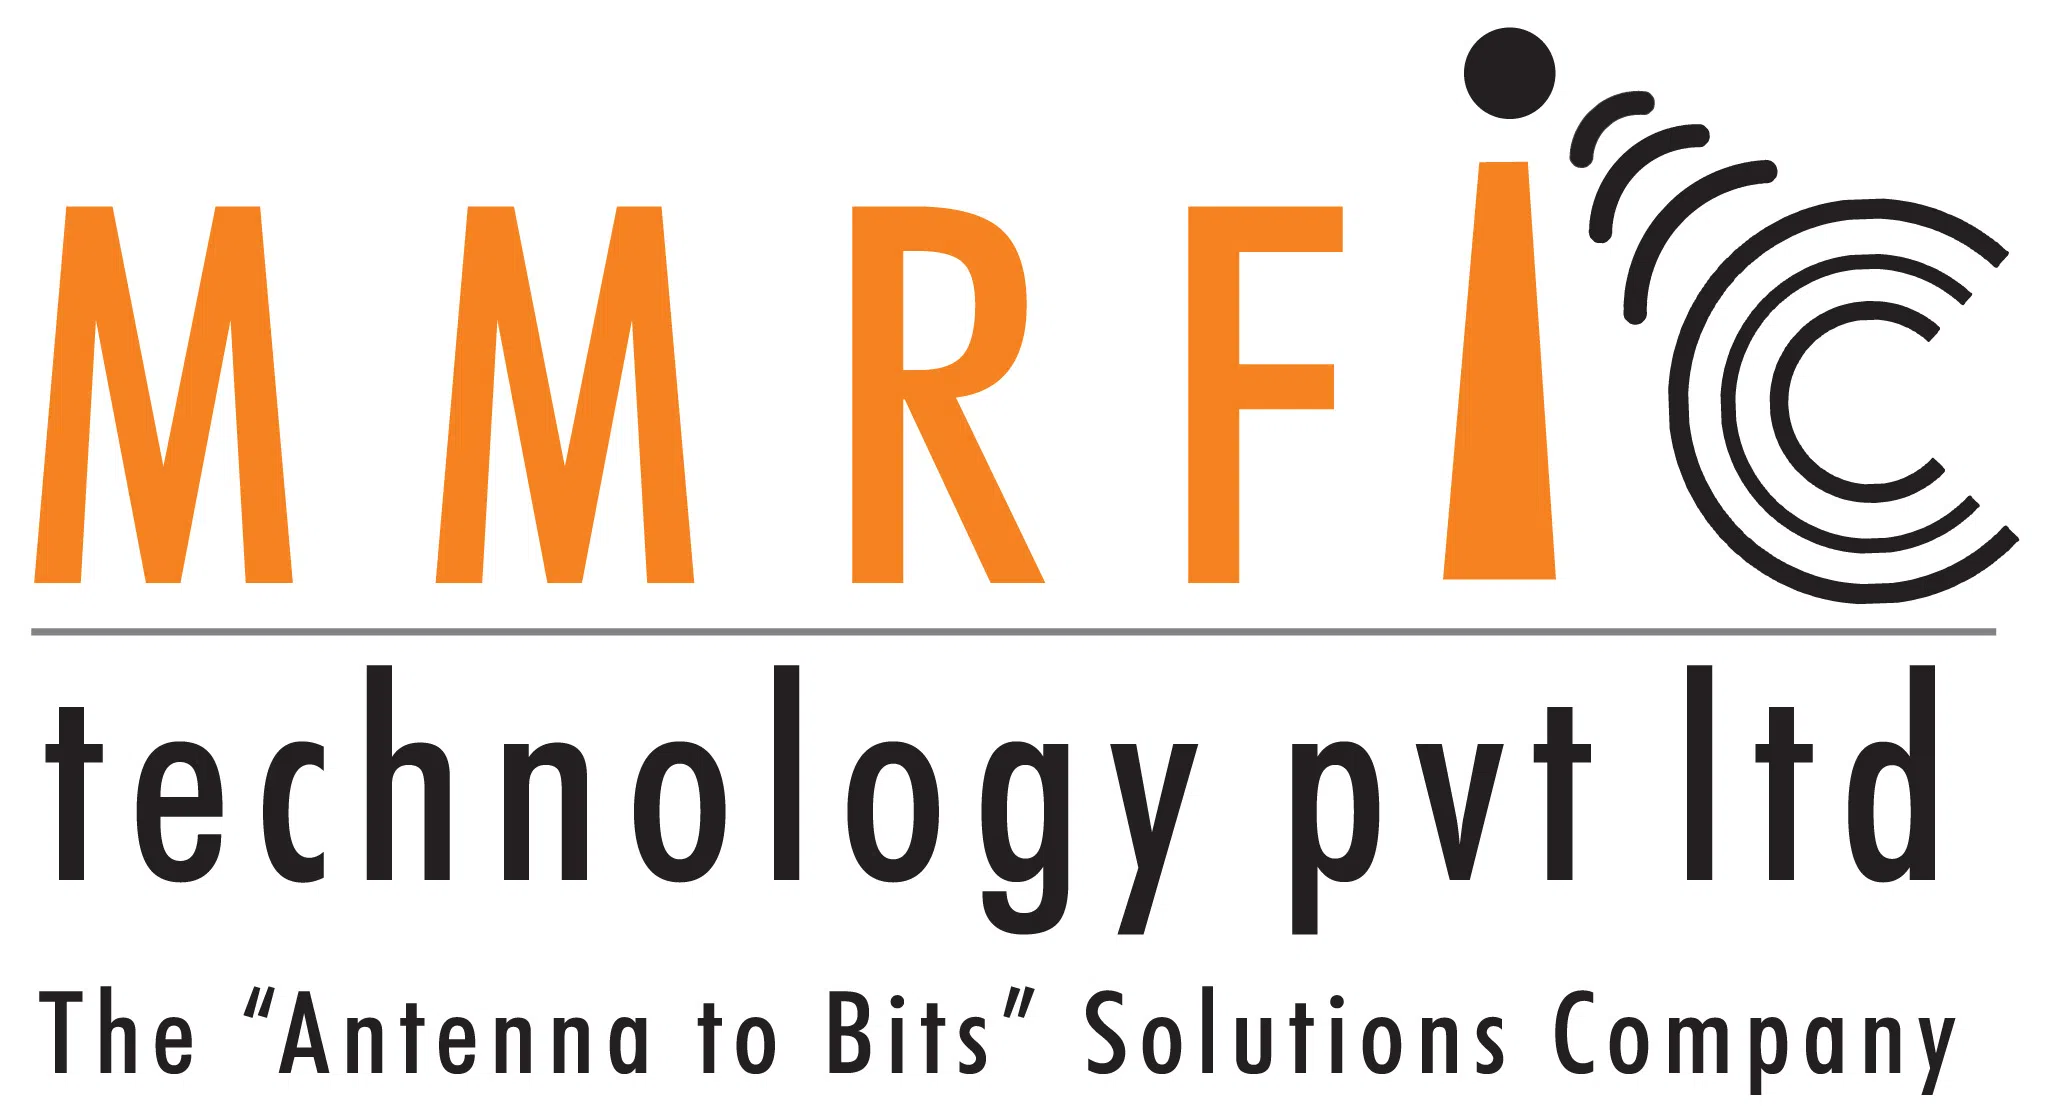 Mmrfic Technology Private Limited